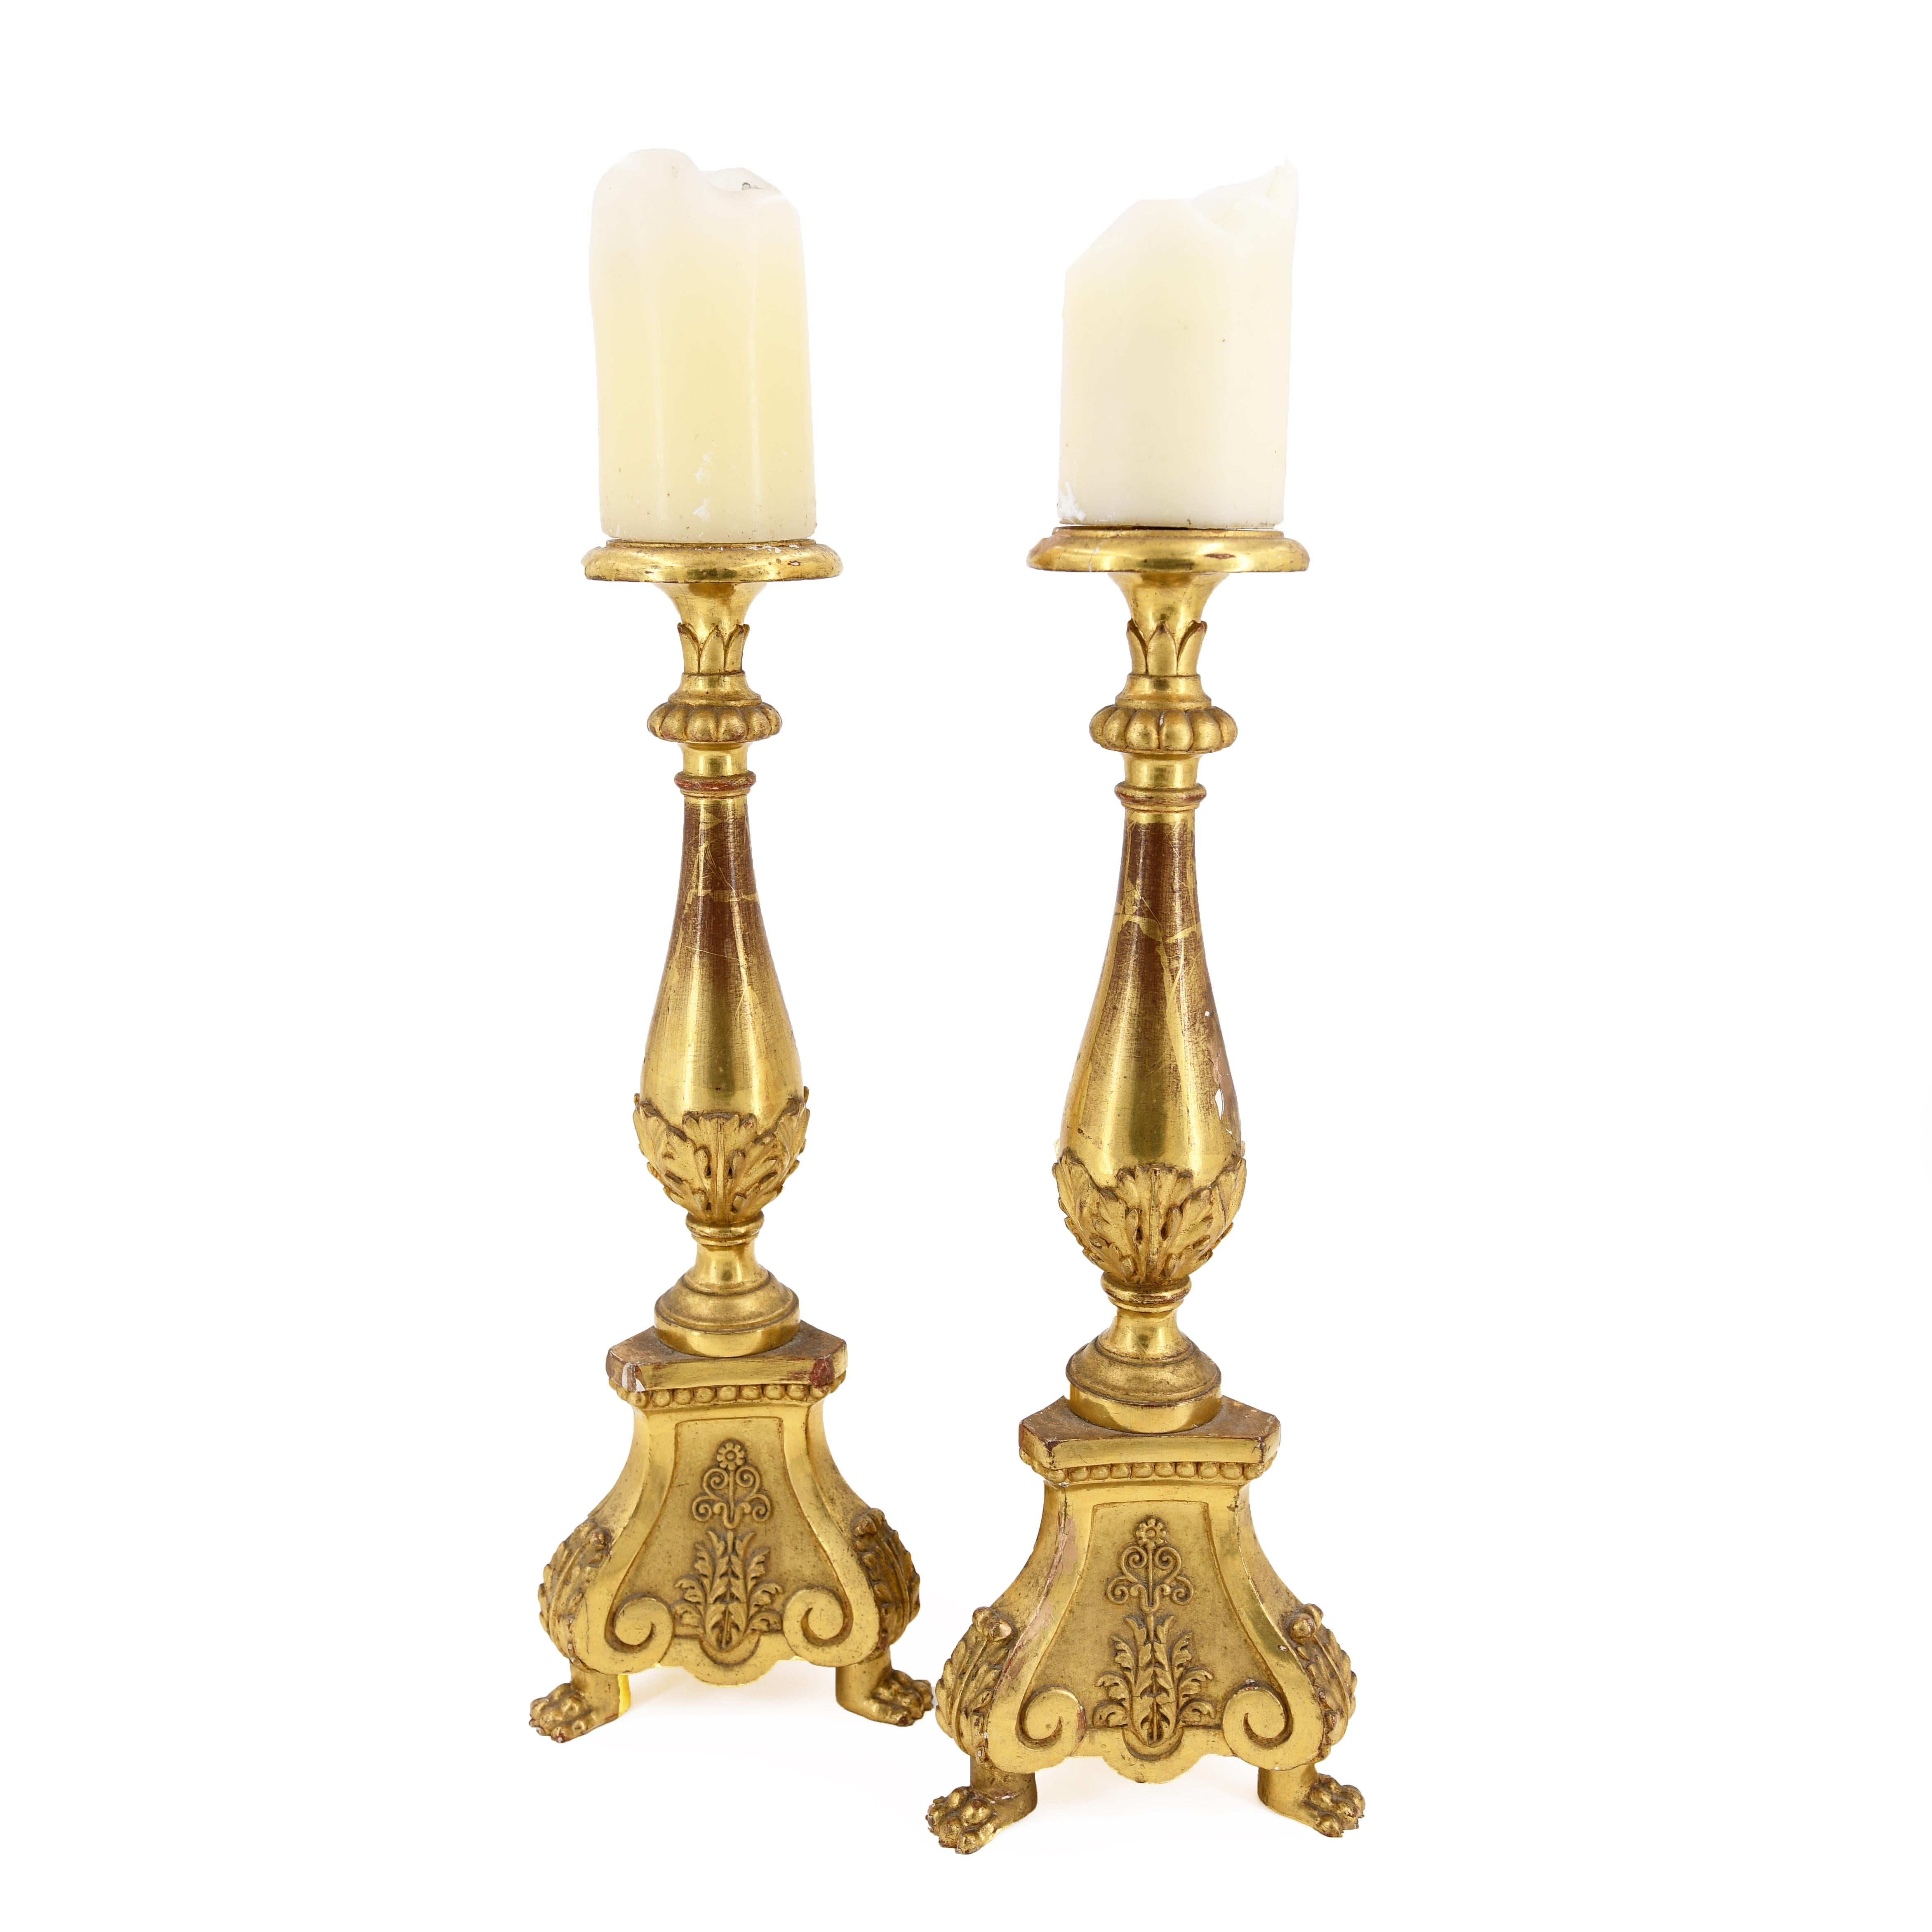 Neoclassical Pair of Italian Giltwood Alter Sticks For Sale